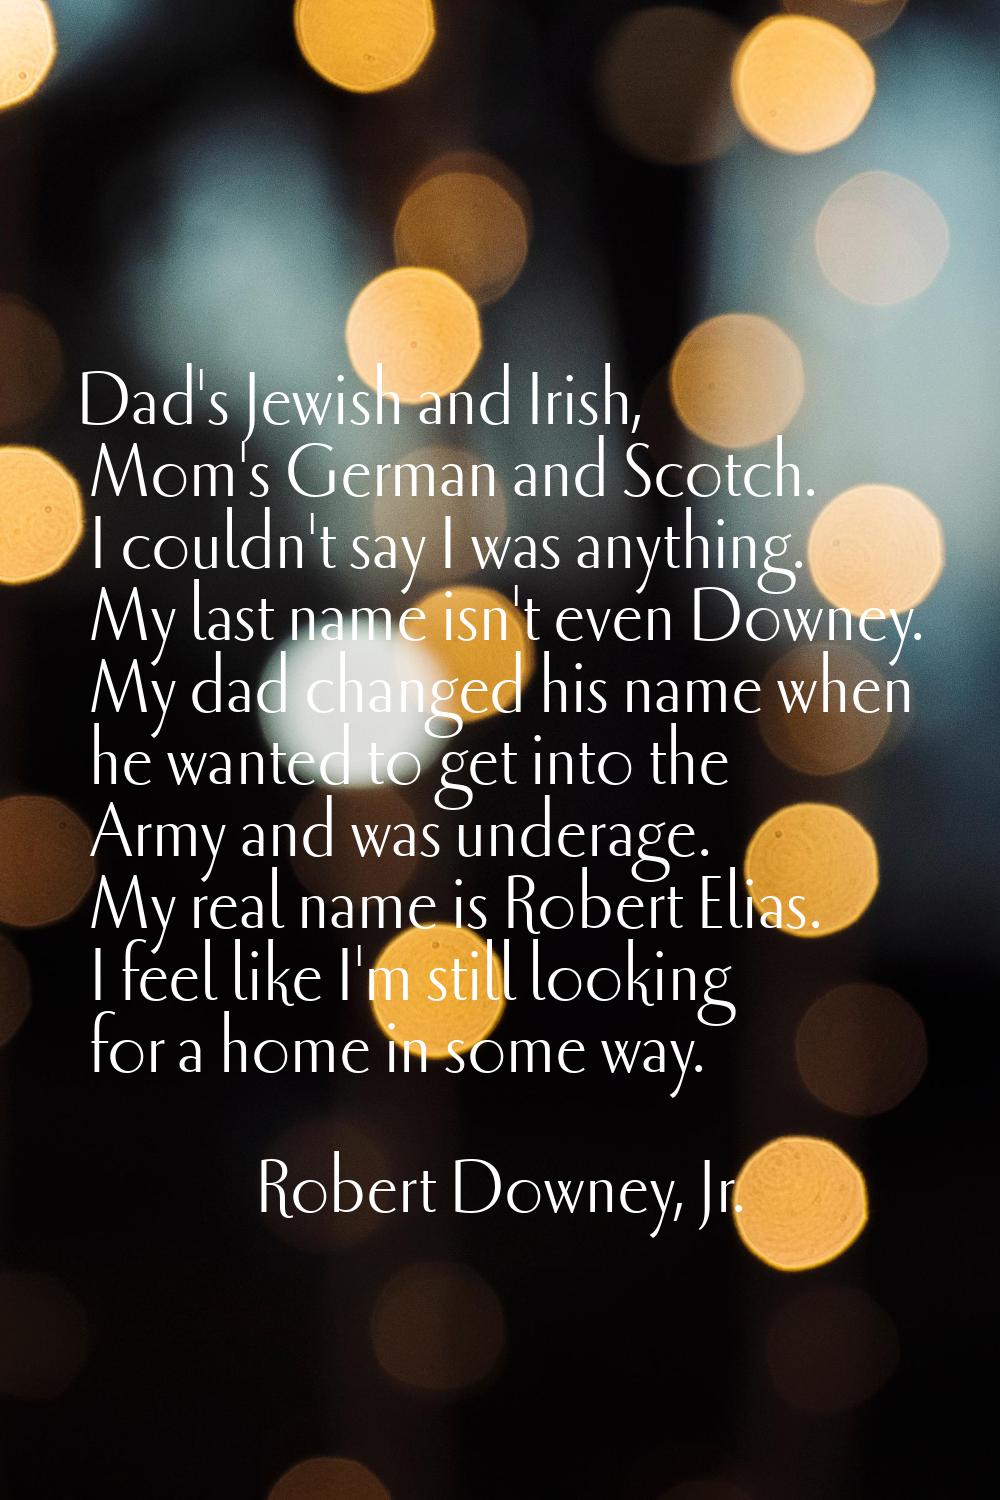 Dad's Jewish and Irish, Mom's German and Scotch. I couldn't say I was anything. My last name isn't 